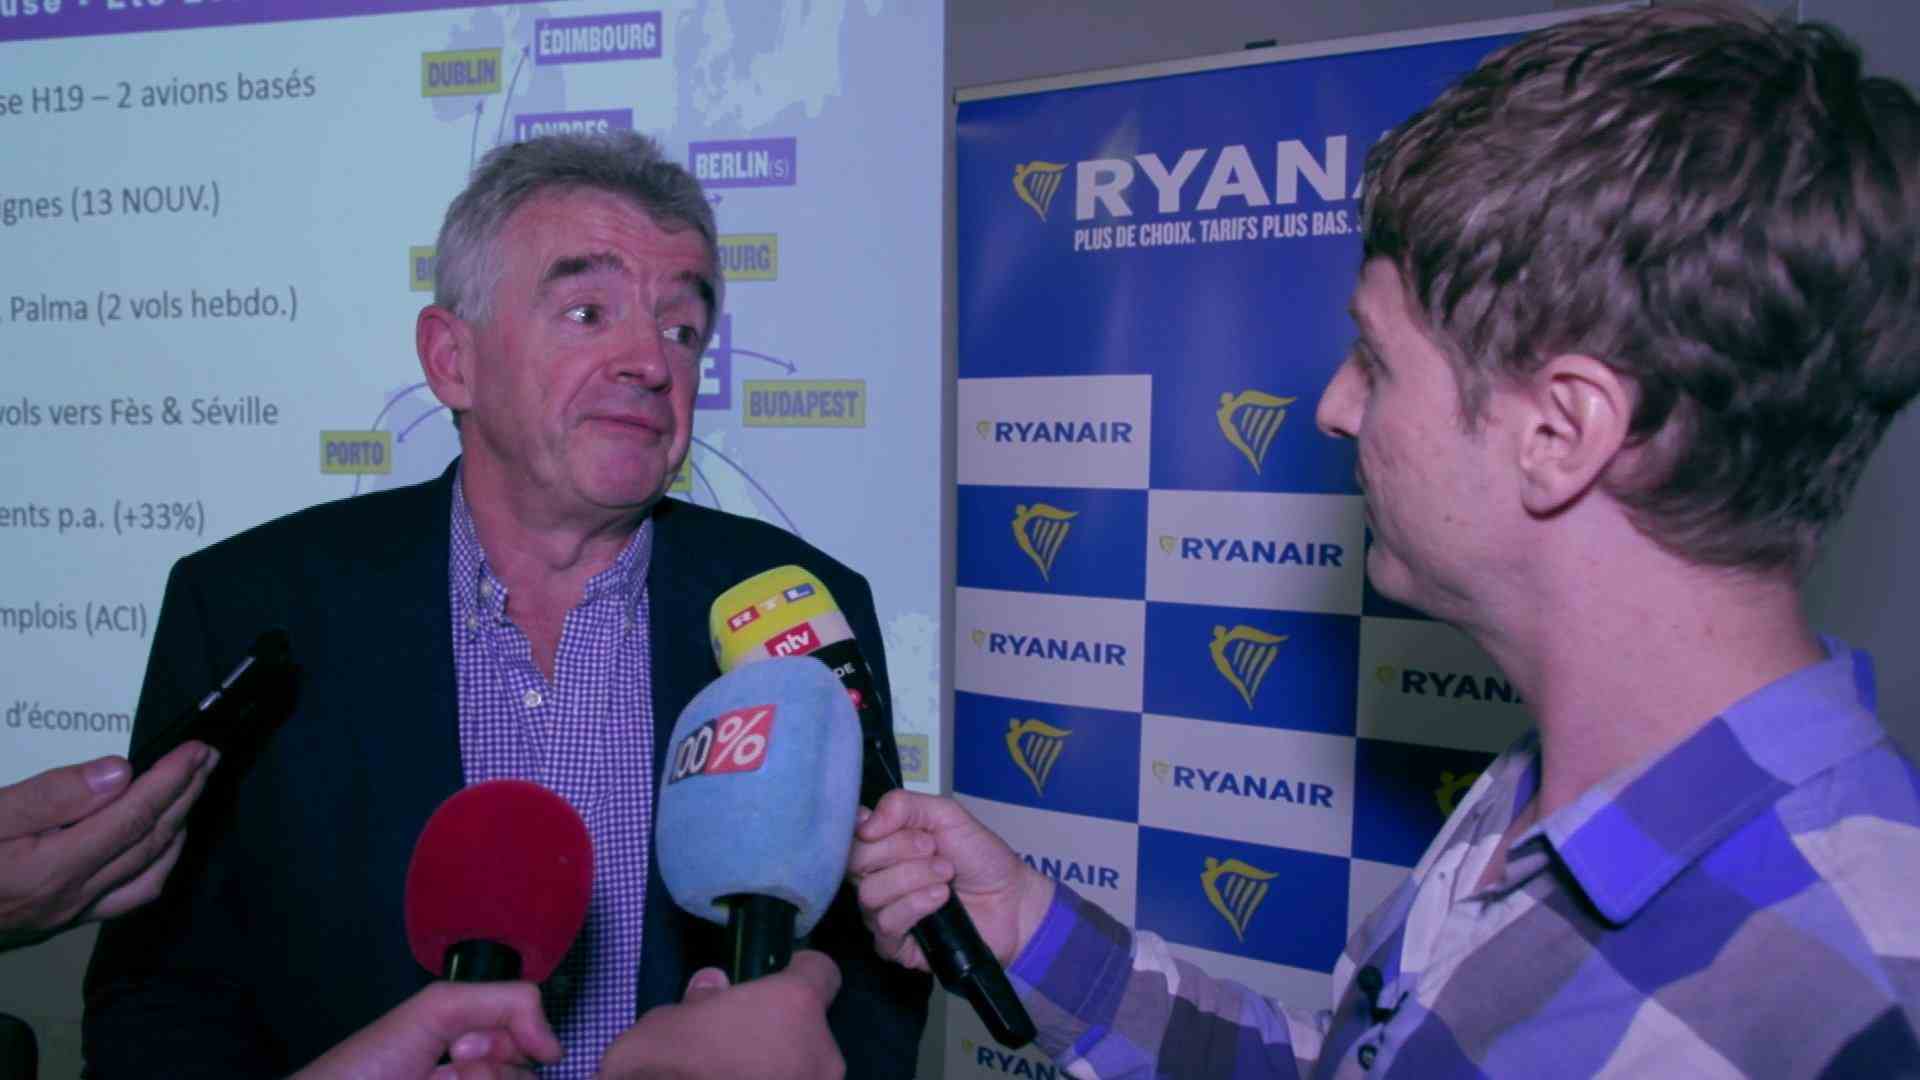 Now Ryanair boss Michael O'Leary speaks What's going wrong with the low-cost airline?